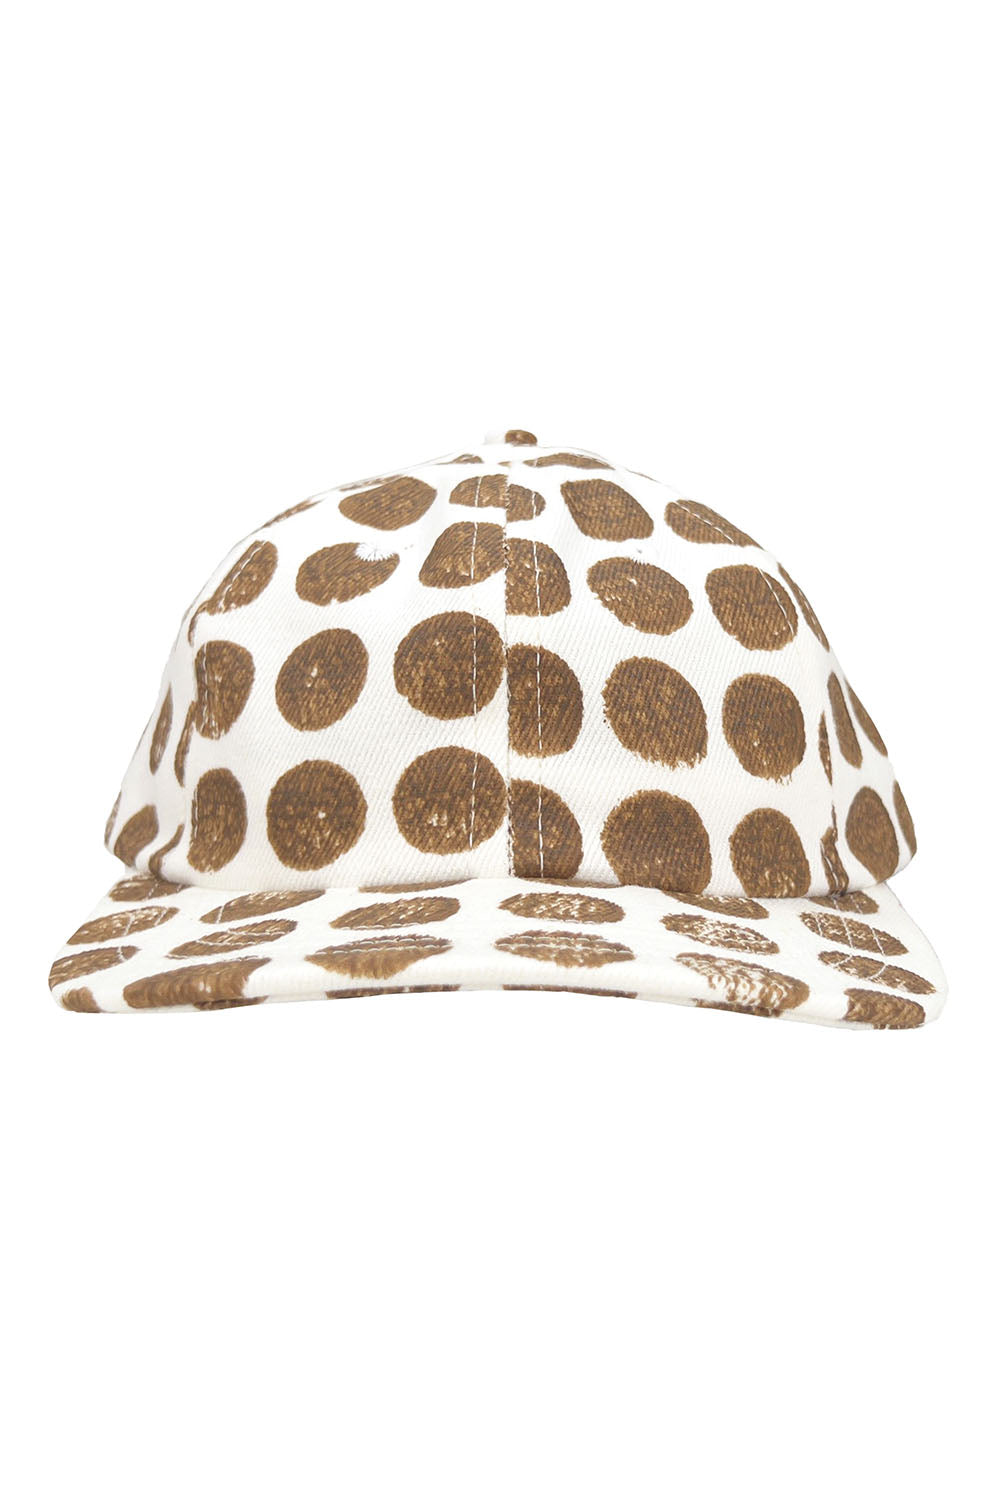 Polka Dot Chenga Cap | Jungmaven Hemp Clothing & Accessories / Color: Coyote Dots on Washed White